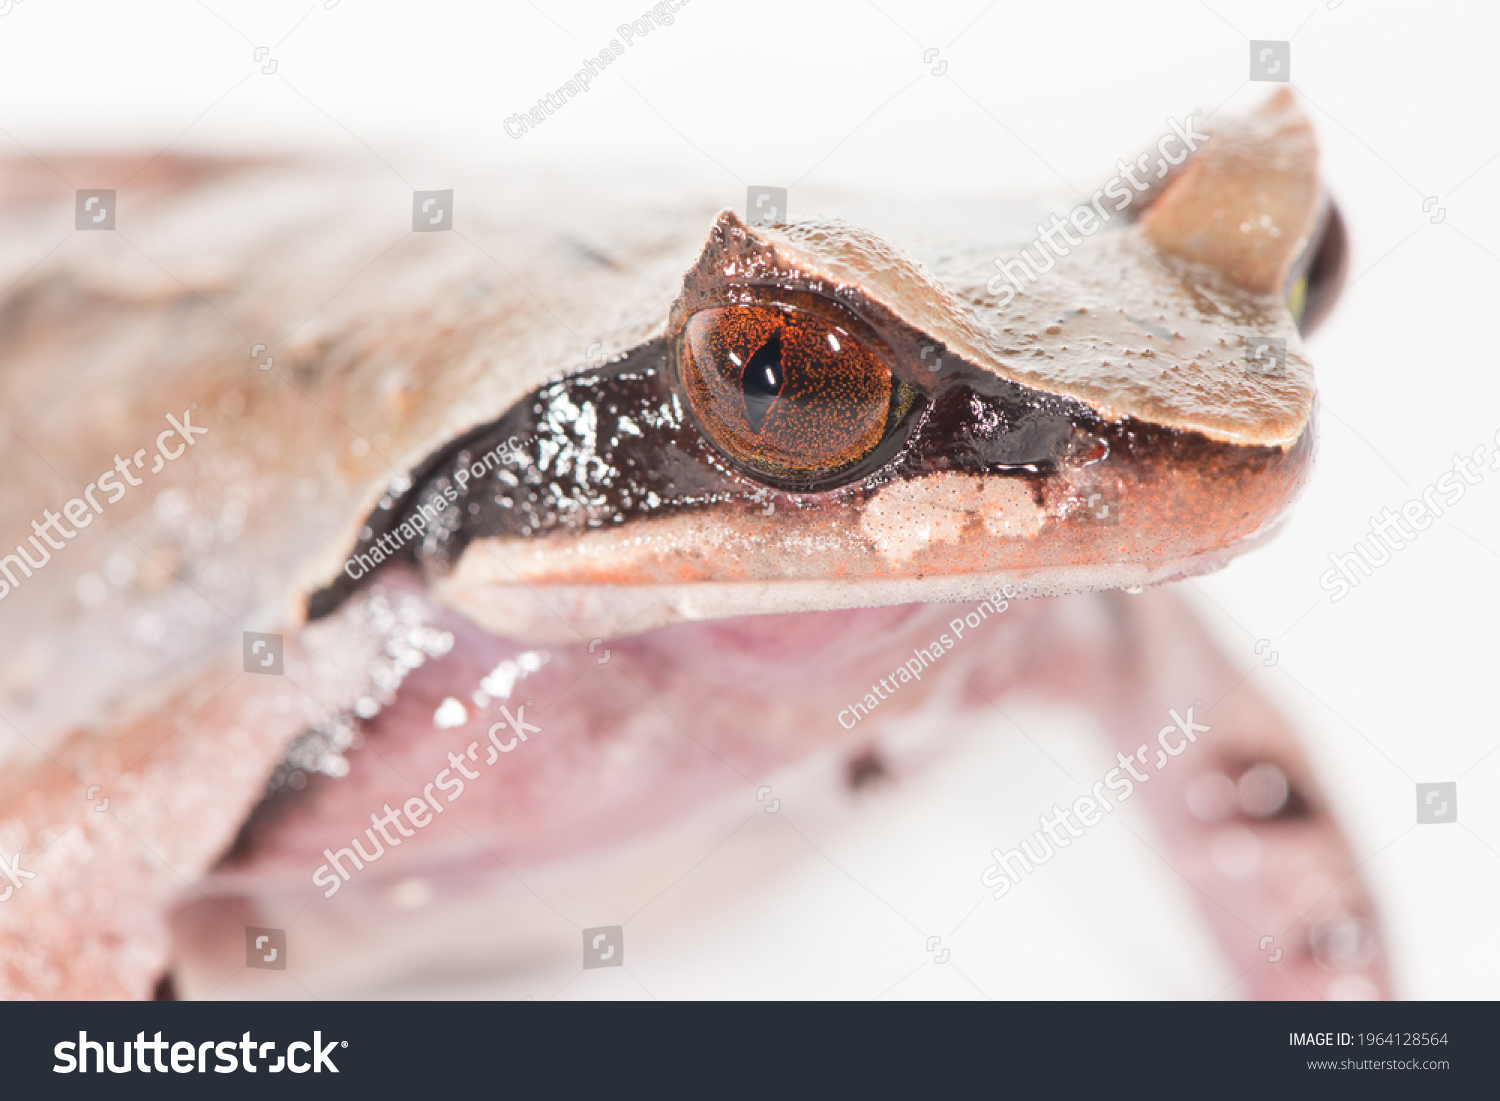 A close up head shot of a female white-lipped horned toad, Xenophrys major, on a white background. #1964128564